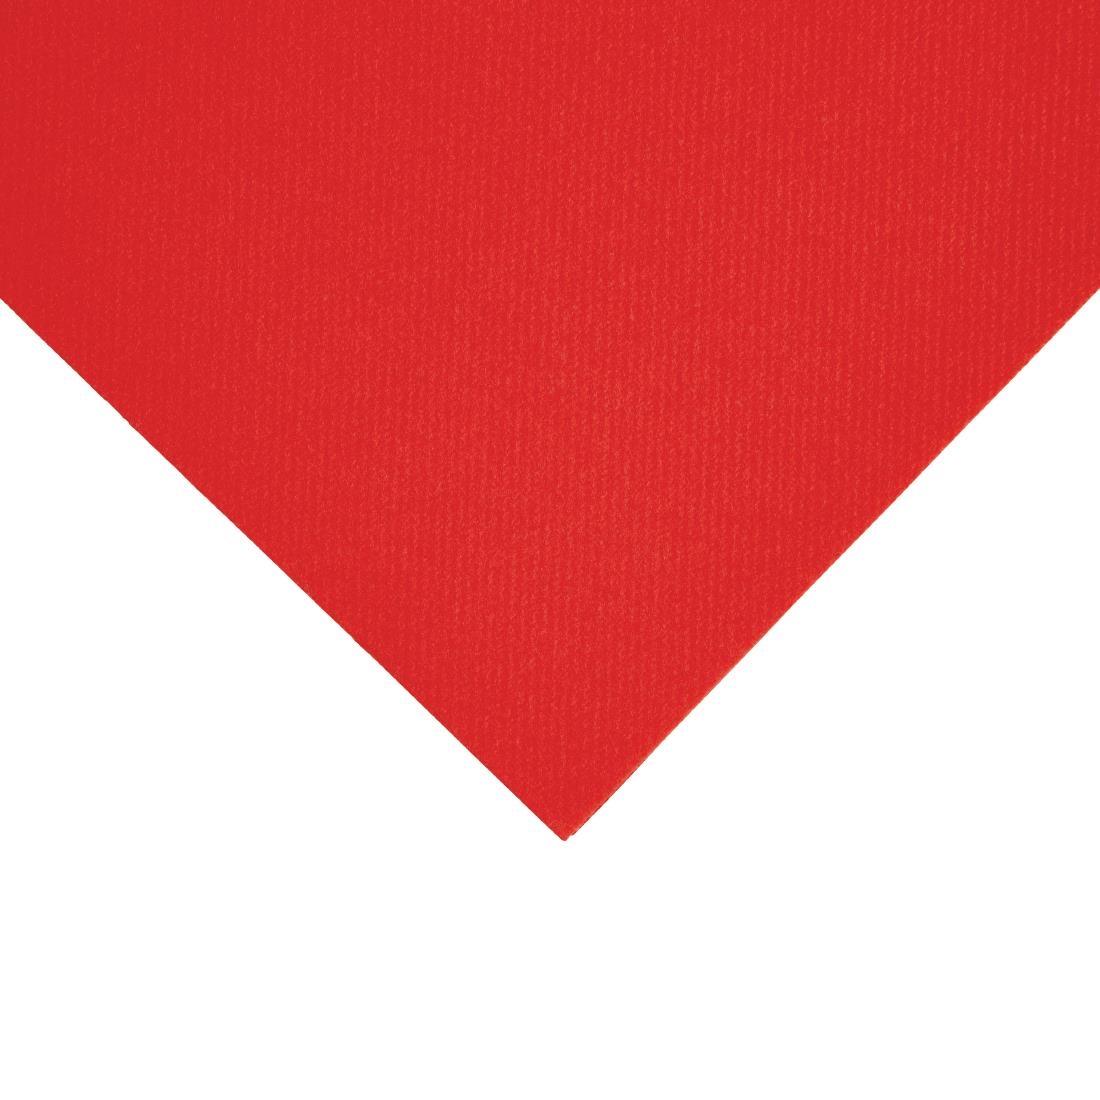 Fiesta Recyclable Premium Tablin Dinner Napkin Red 40x40cm Airlaid 1/4 Fold (Pack of 500) - FE267  - 2